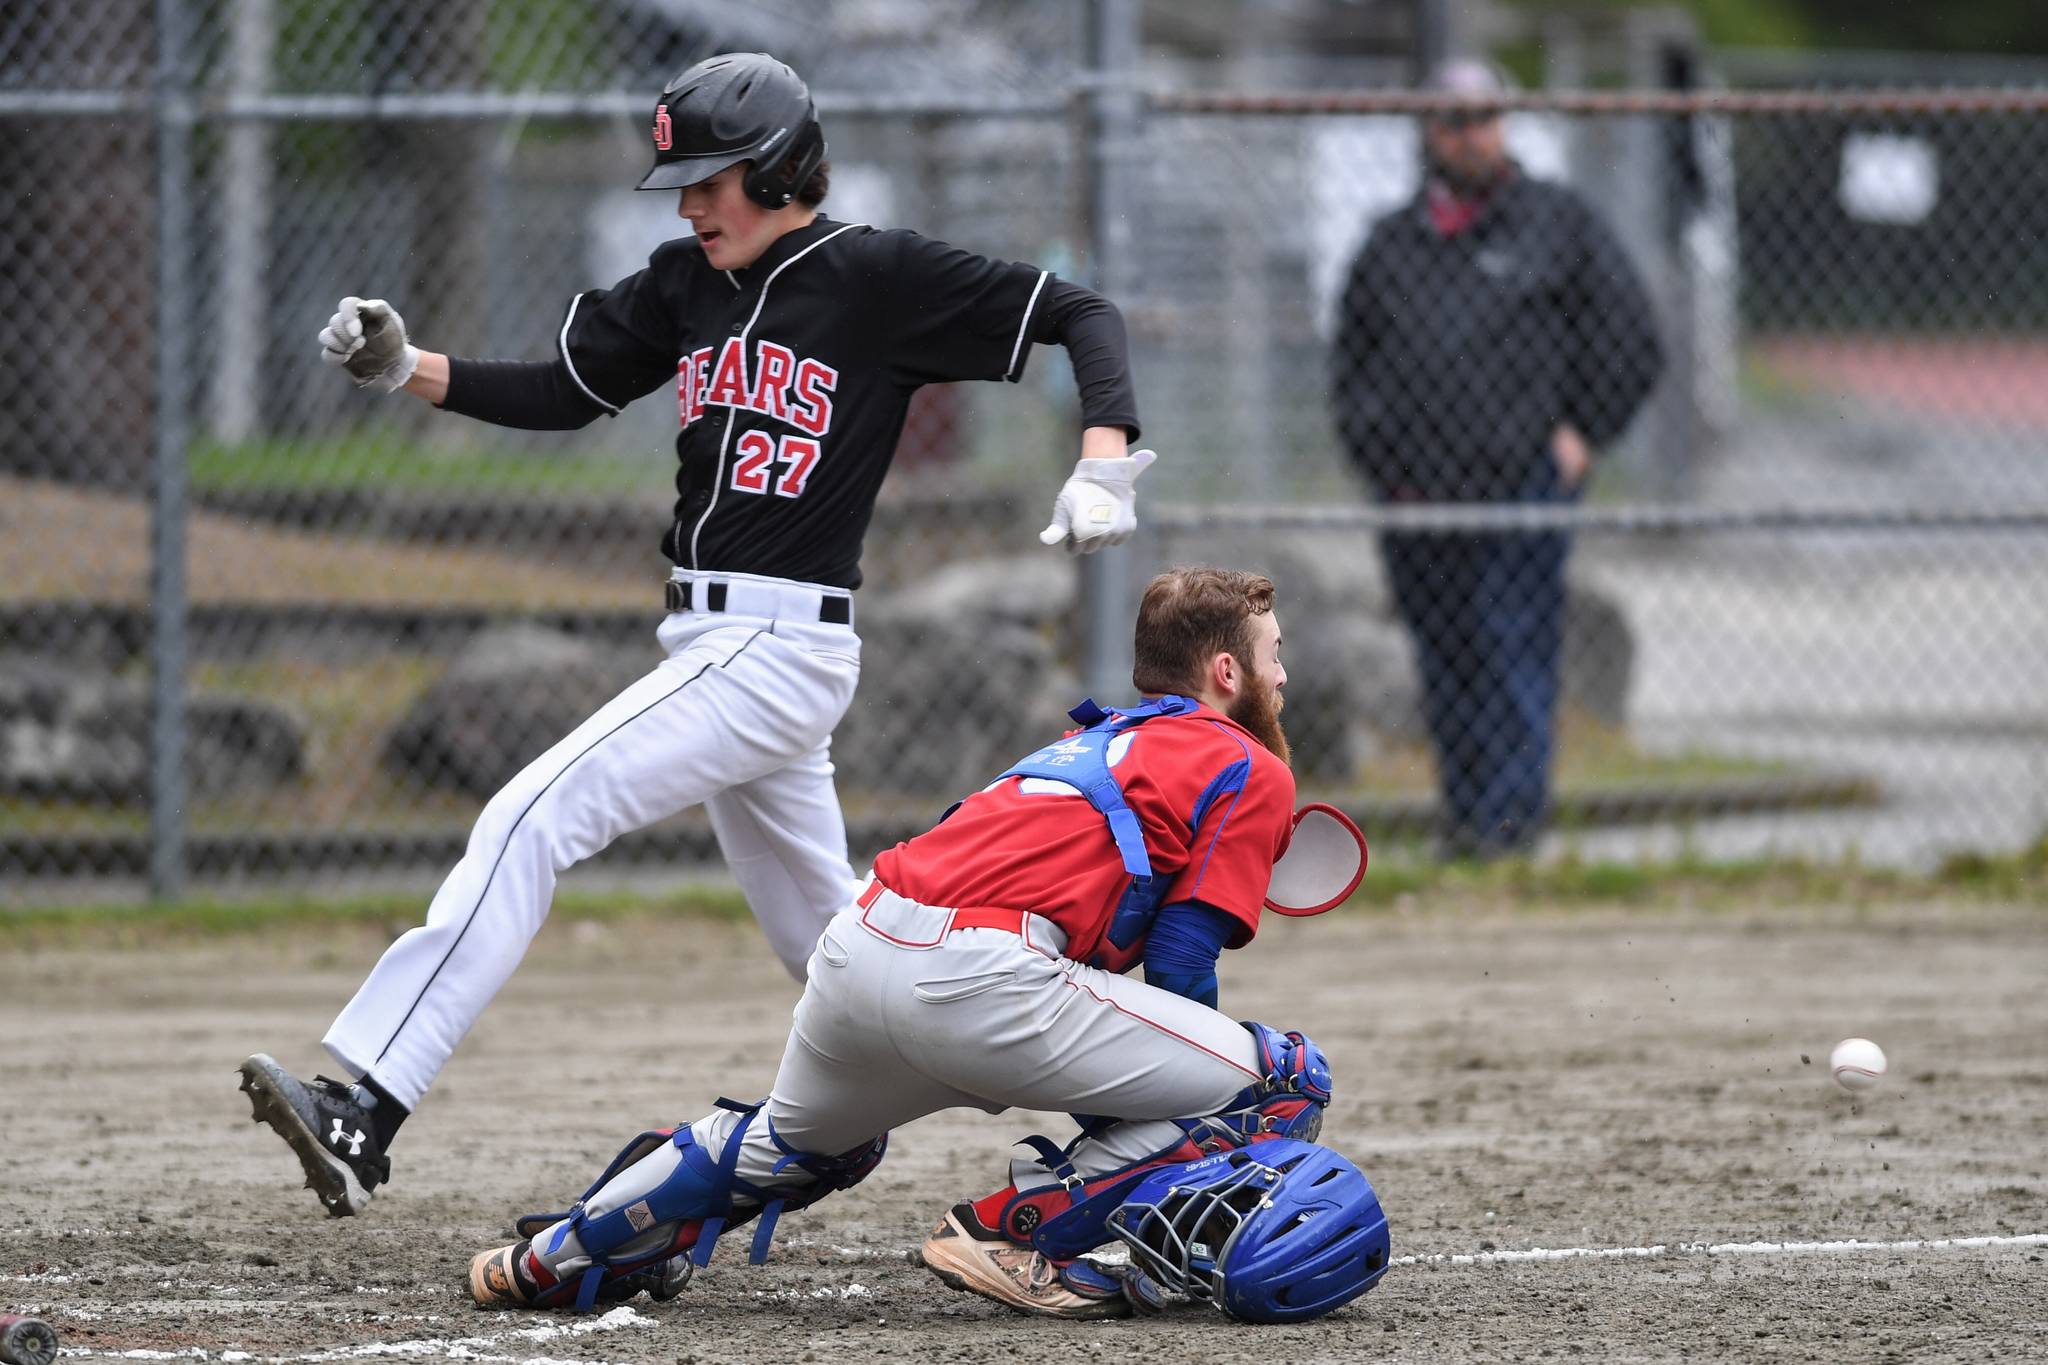 Thunder Mountain’s Oliver Mendoza catches a fly all against Sitka as then-teammate Bryson Echiverri ducks out of the way during the Region V Baseball Championship at Adair-Kennedy Memorial Park on Friday, May 24, 2019. TMHS lost 1-7. Mendoza is expected to be a key contributor for the Falcons this year. (Michael Penn | Juneau Empire File)